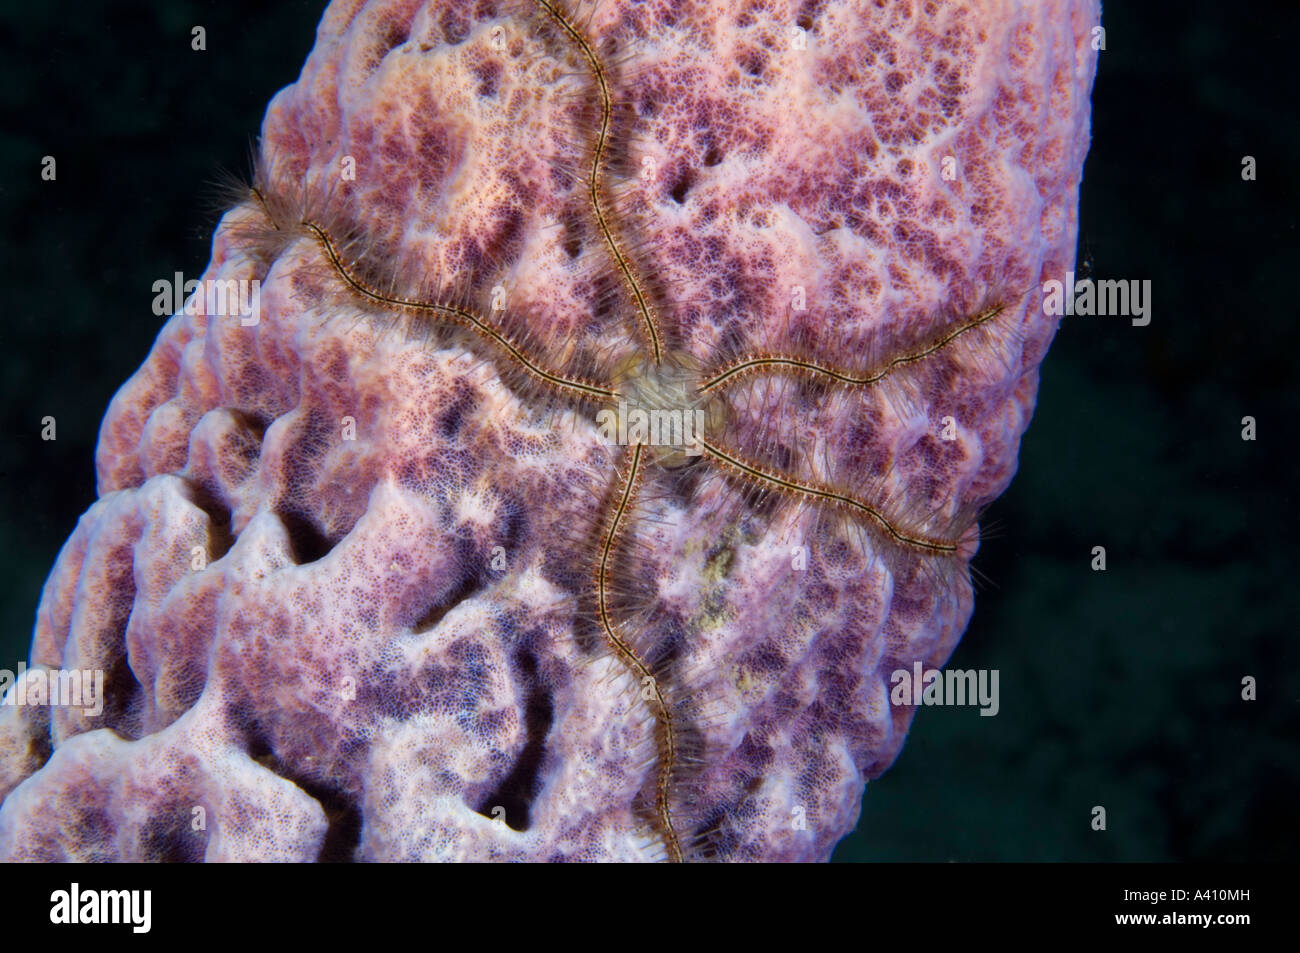 Brittle star and tube sponge on coral reef at Bonaire Island in the Caribbean Stock Photo